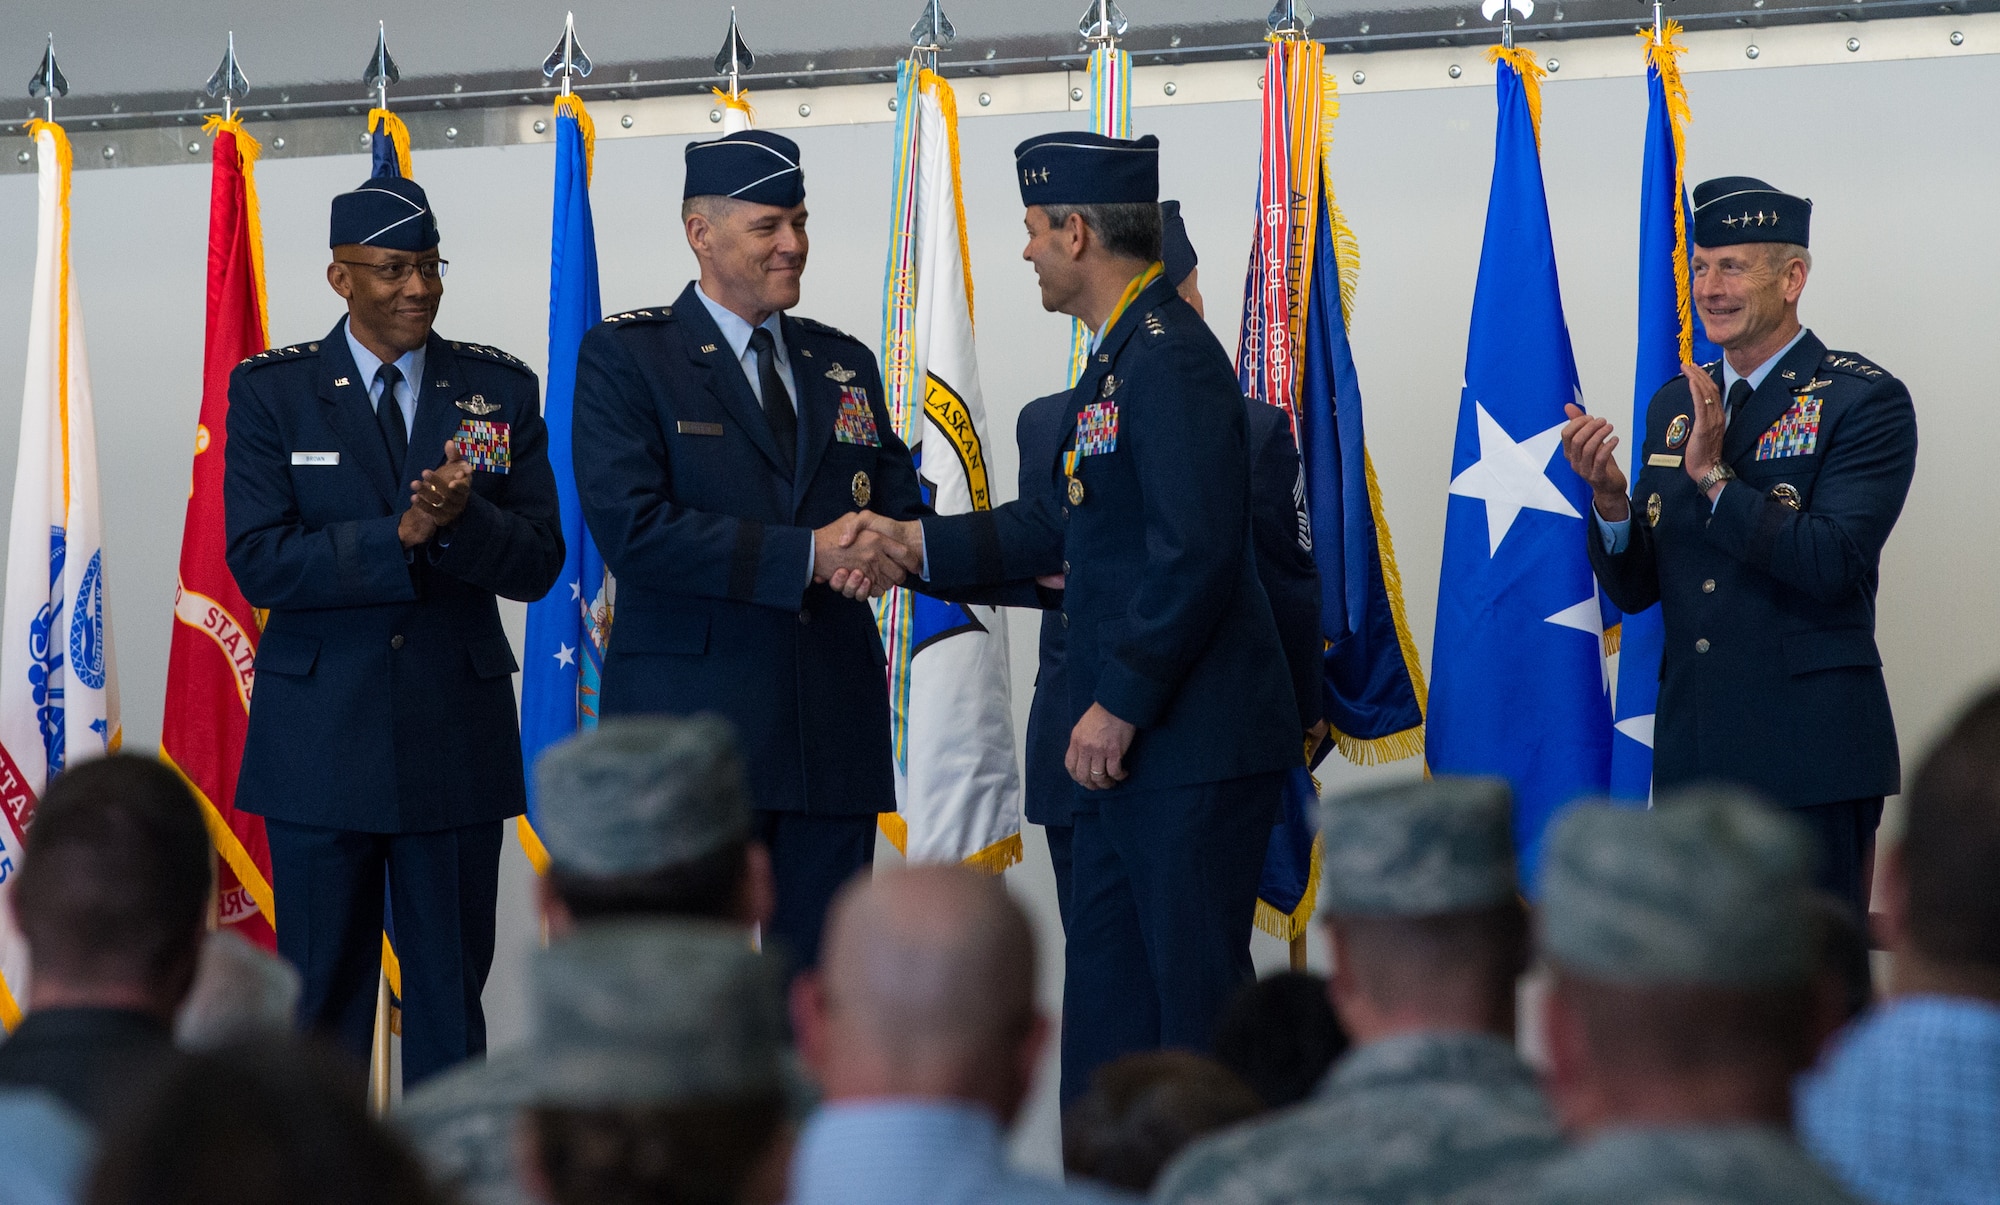 U.S. Air Force Lt. Gen. Tom Bussiere shakes hands with U.S. Air Force Lt. Gen. Ken Wilsbach, after a change of command ceremony in which Bussiere replaced Wilsbach as commander of Alaskan North American Aerospace Defense Command, Alaskan Command, and the Eleventh Air Force at Joint Base Elmendorf-Richardson, Alaska, Aug. 24, 2018. Family, friends, Arctic warriors and civic leaders from the surrounding communities attended the ceremony that was jointly-officiated by Air Force Gen. Terrence J. O’Shaughnessy, commander of the United States Northern Command and North American Aerospace Defense Command, and Gen. Charles Q. Brown, the commander of Pacific Air Forces.